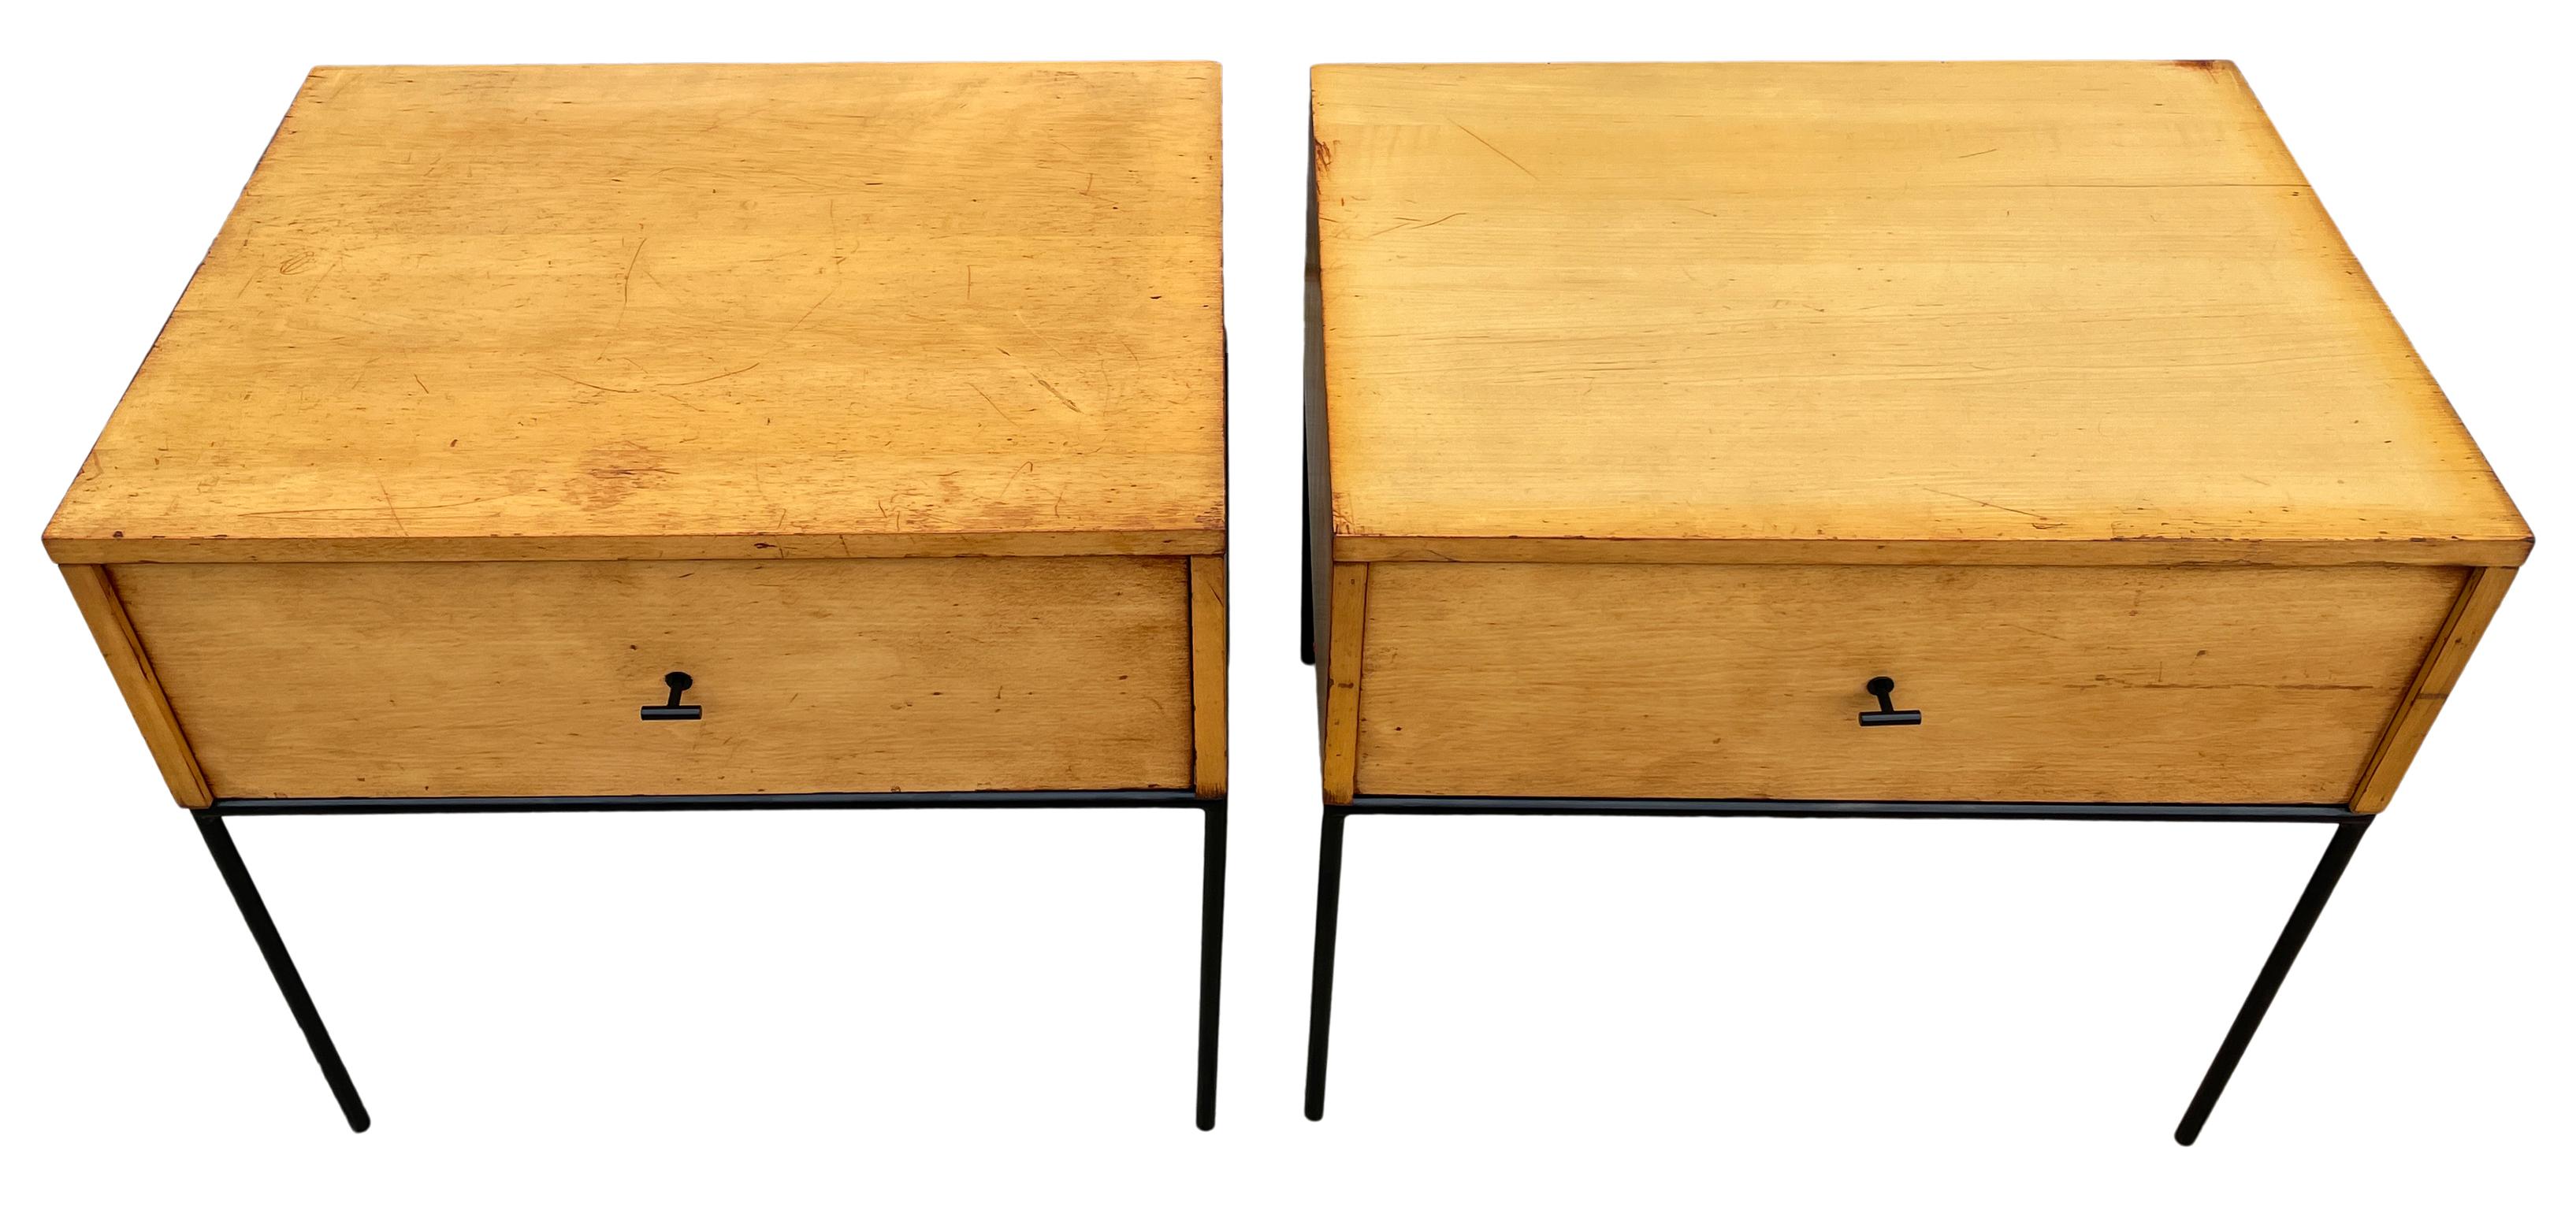 Beautiful pair of Paul McCobb planner group #1500 maple nightstands end tables single drawer. Black T pull knobs. Original vintage used condition with Blonde finish on maple. Very modern designed pair of nightstands with iron base with 4 legs. All